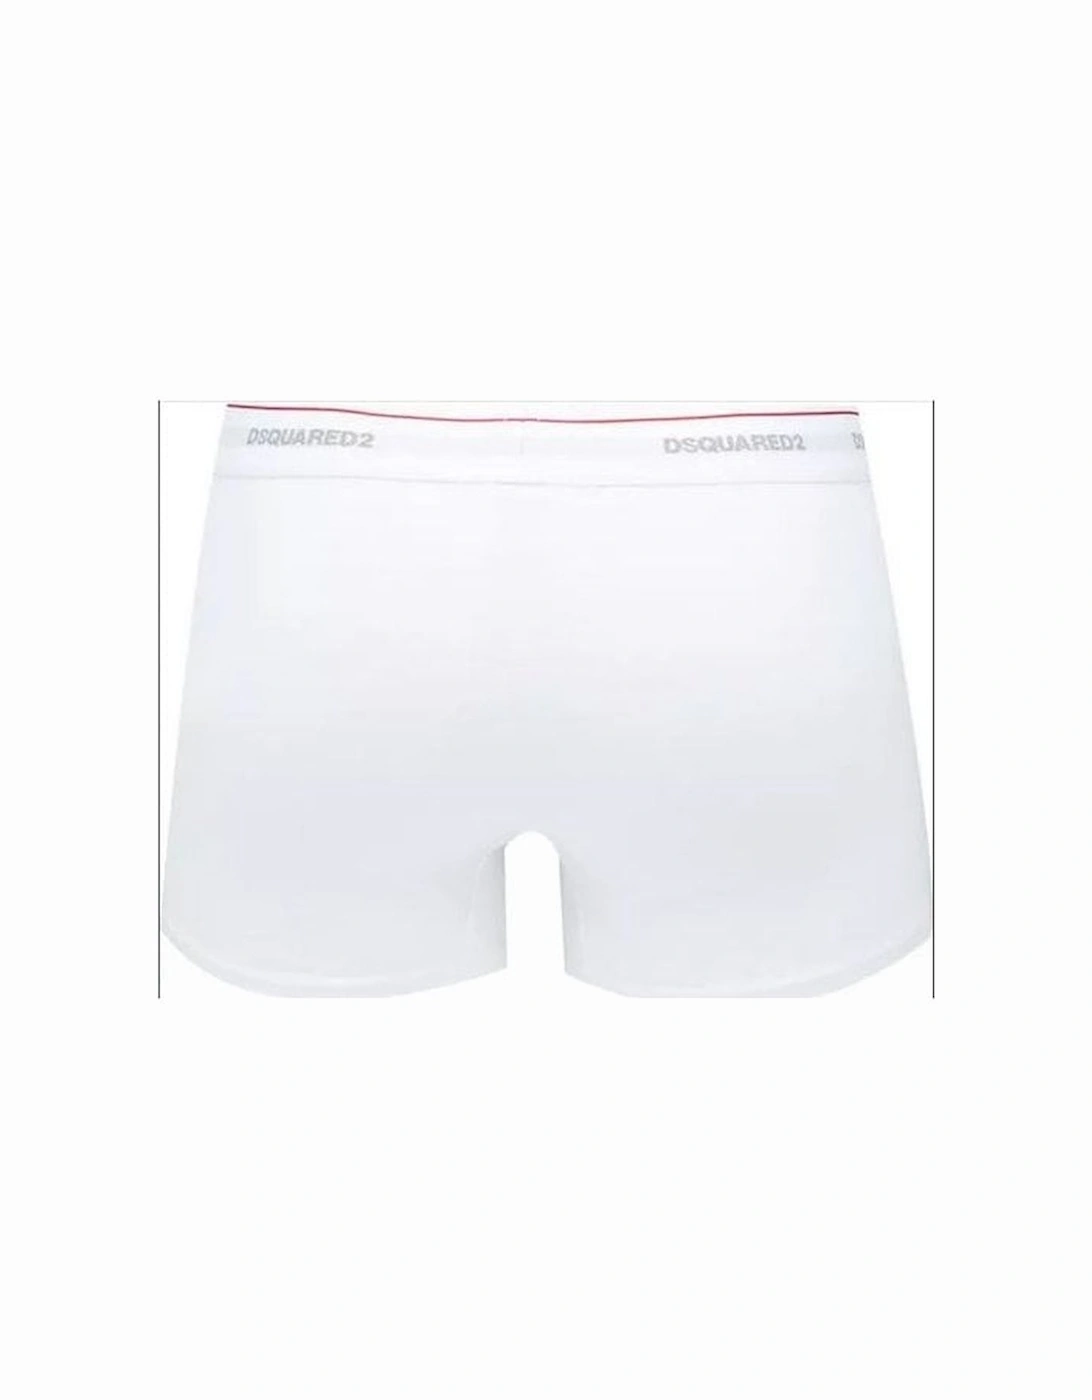 Cotton 3Pack White Boxers